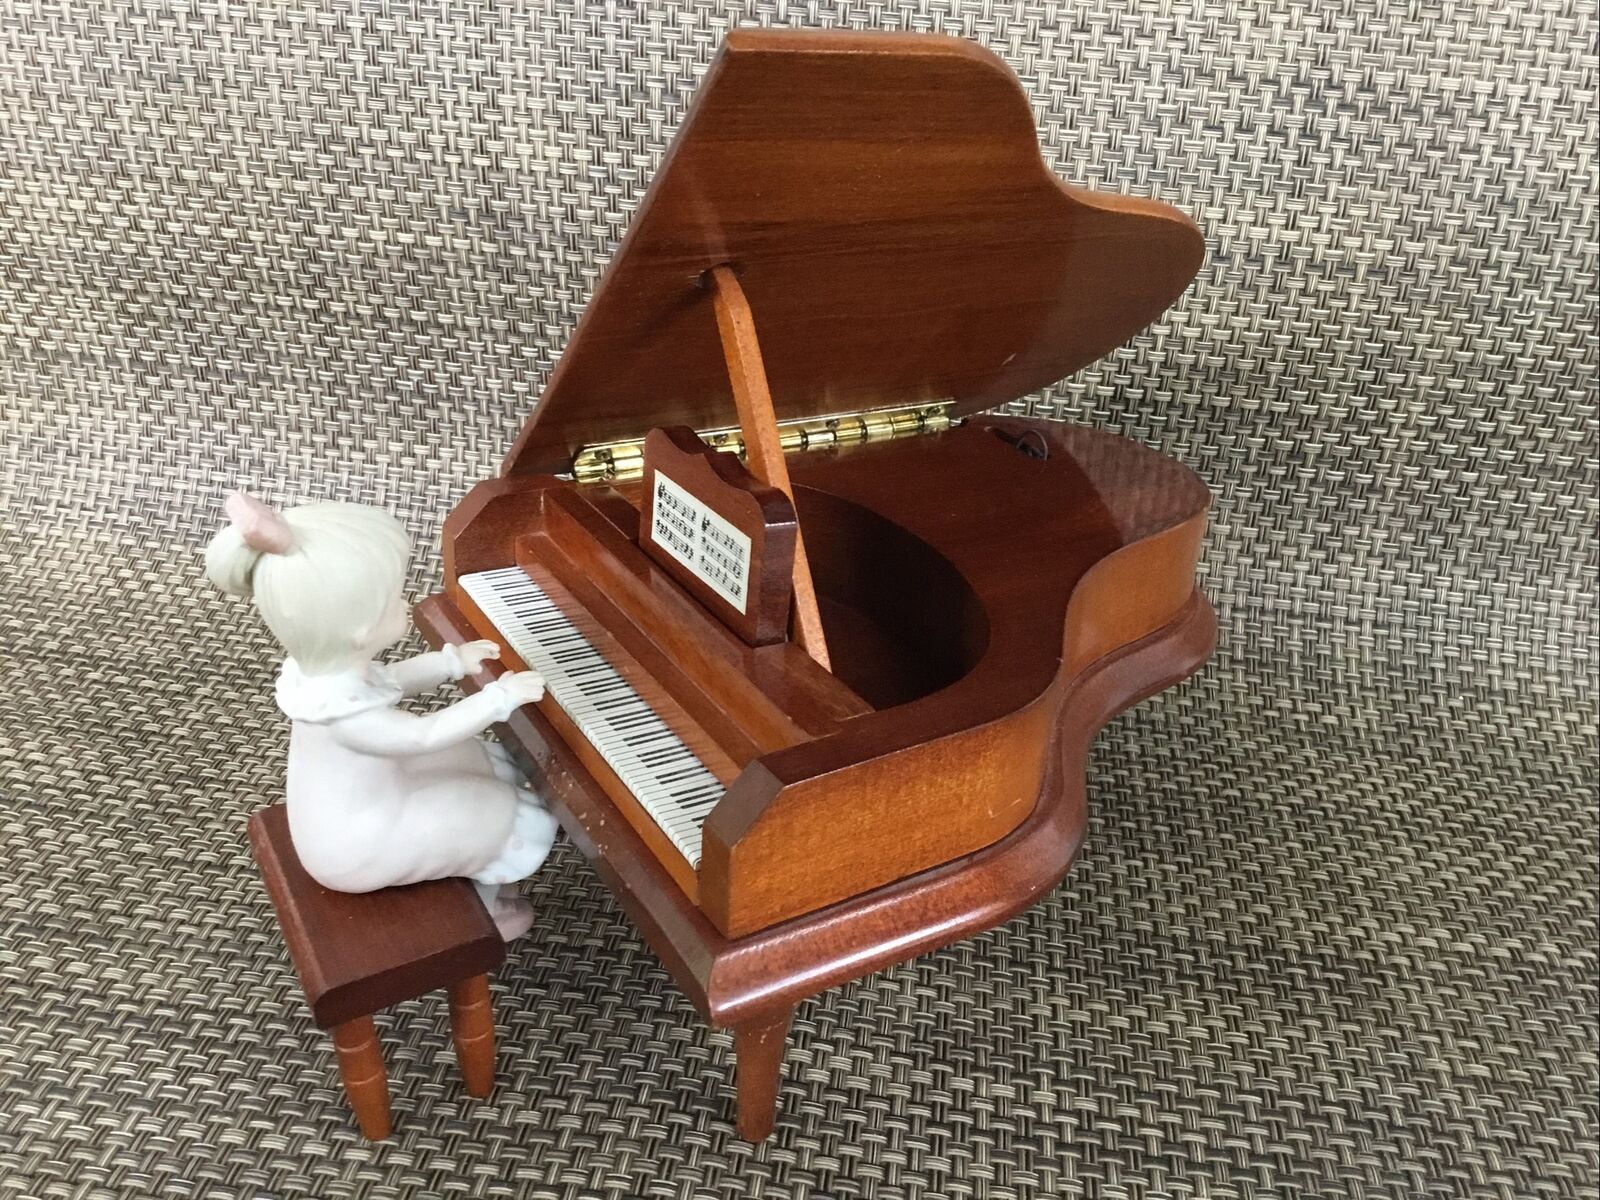 Vintage Wood Music Box Lefton Grand Piano Plays With Girl and Stool